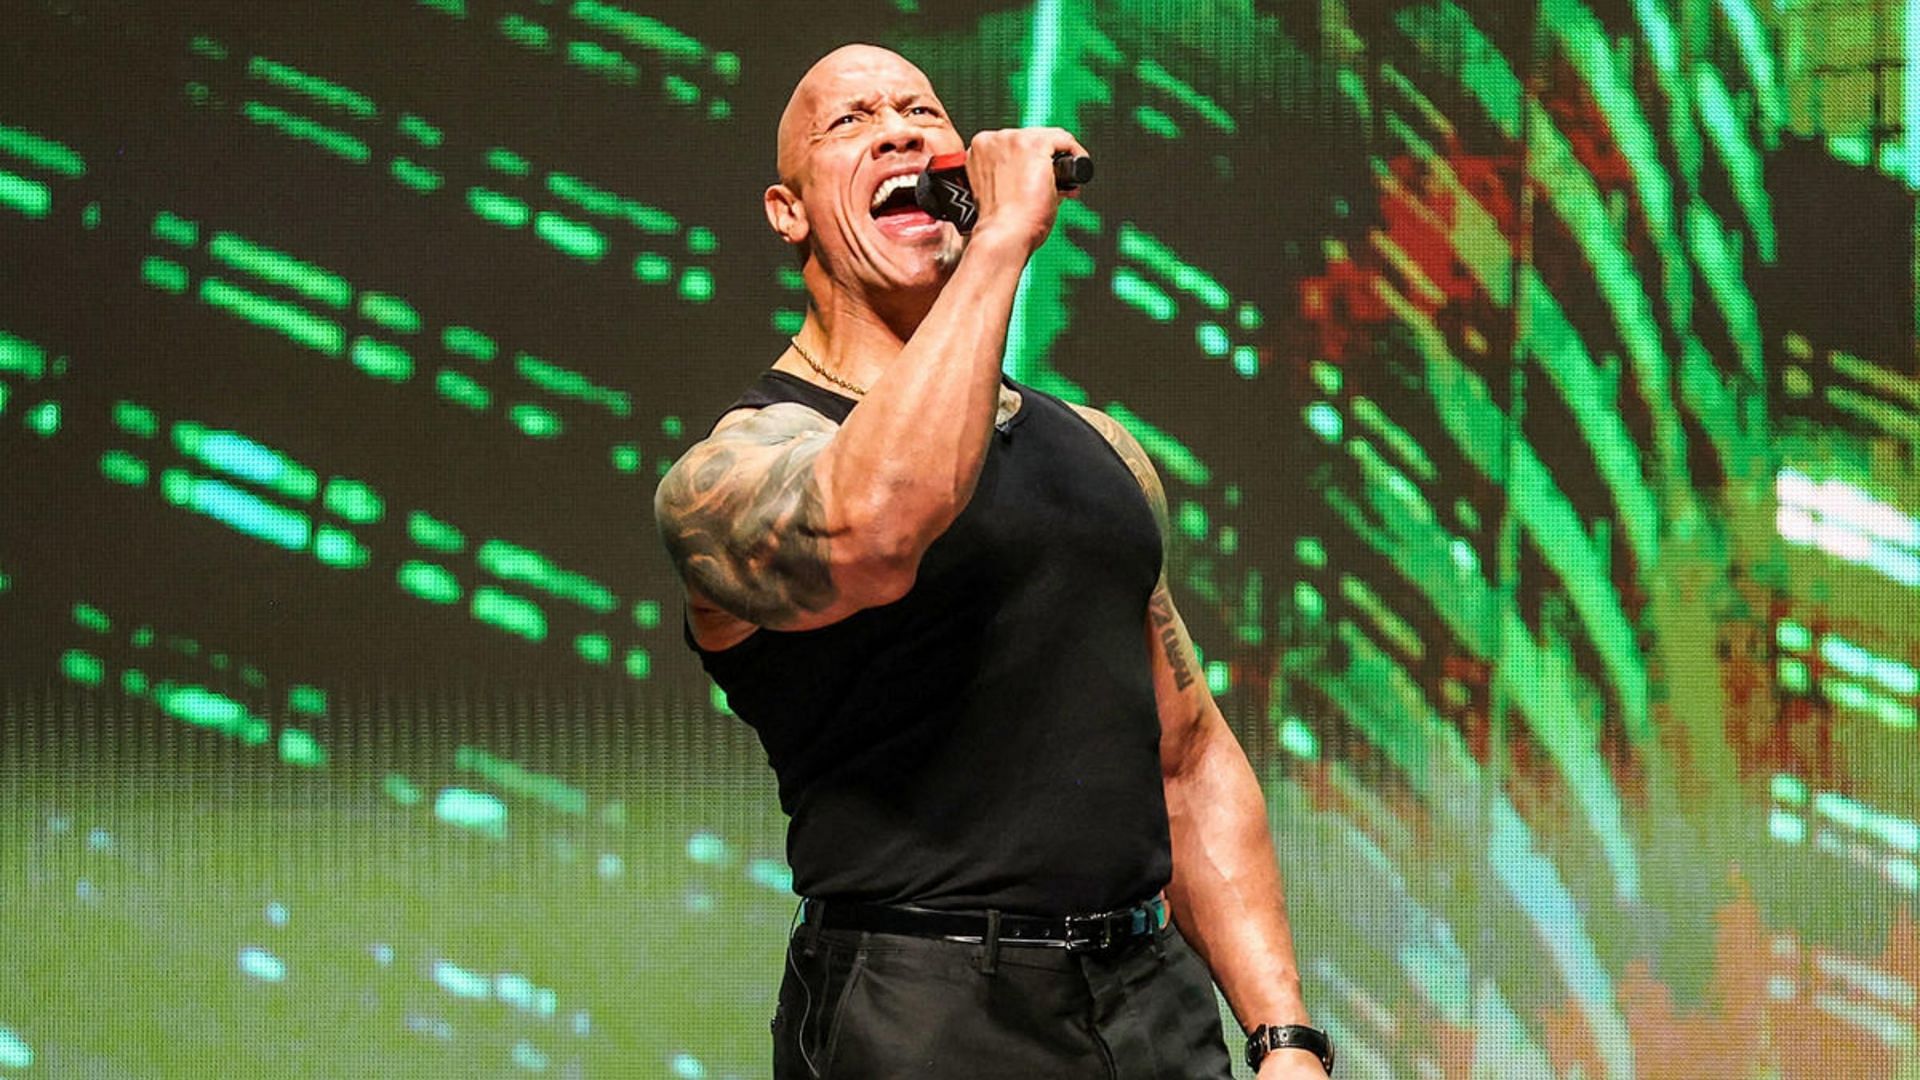 The Rock will return to WWE SmackDown this Friday